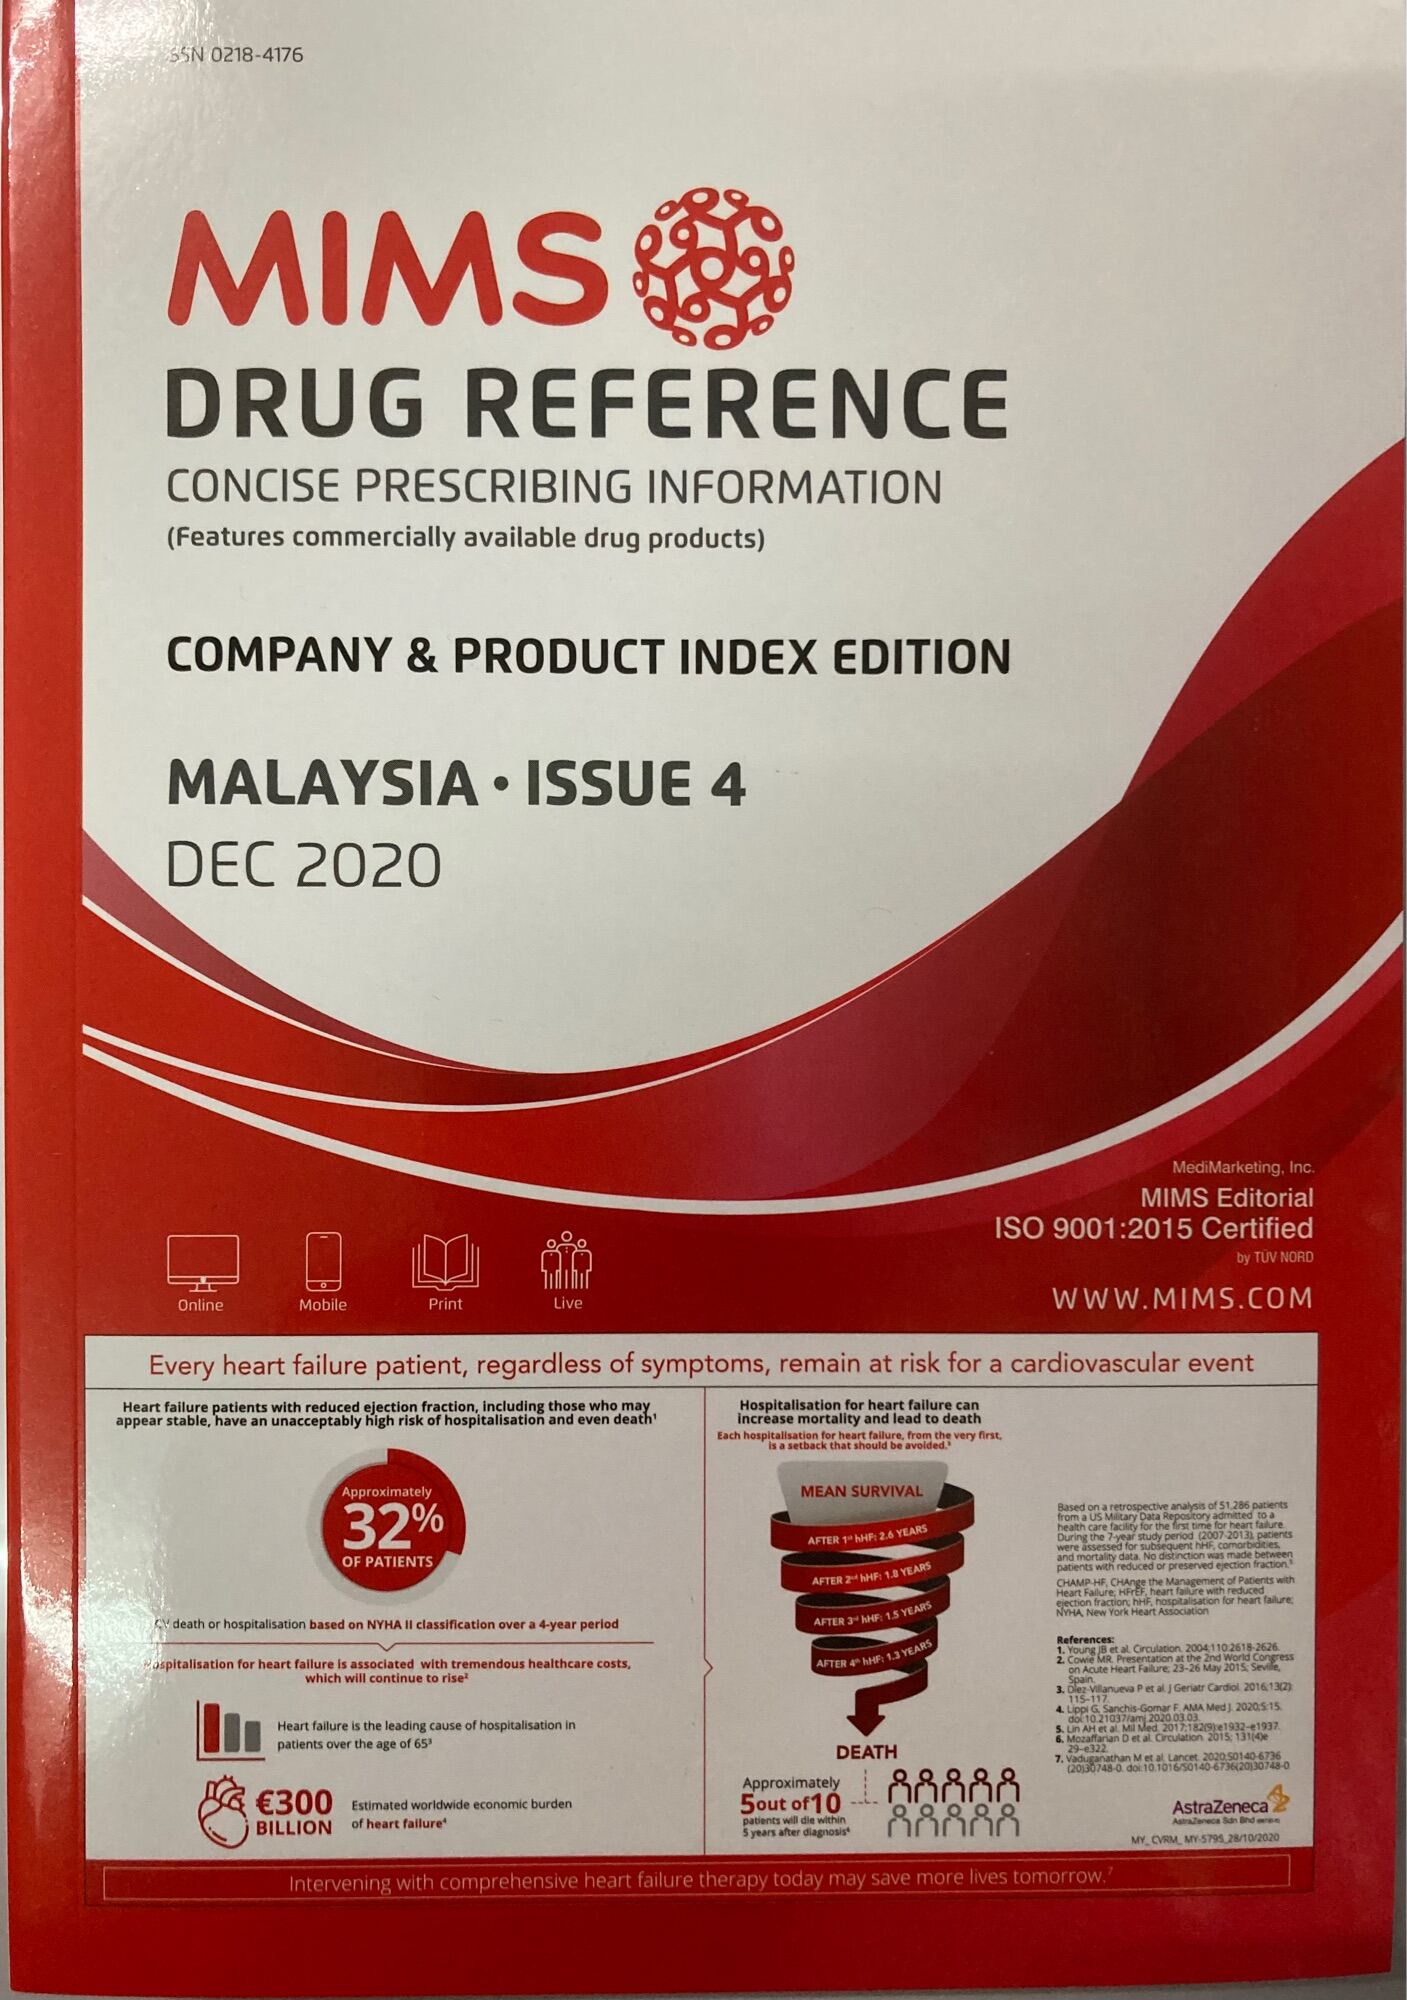 MIMS Drug Reference concise prescribing information malaysia issue 4